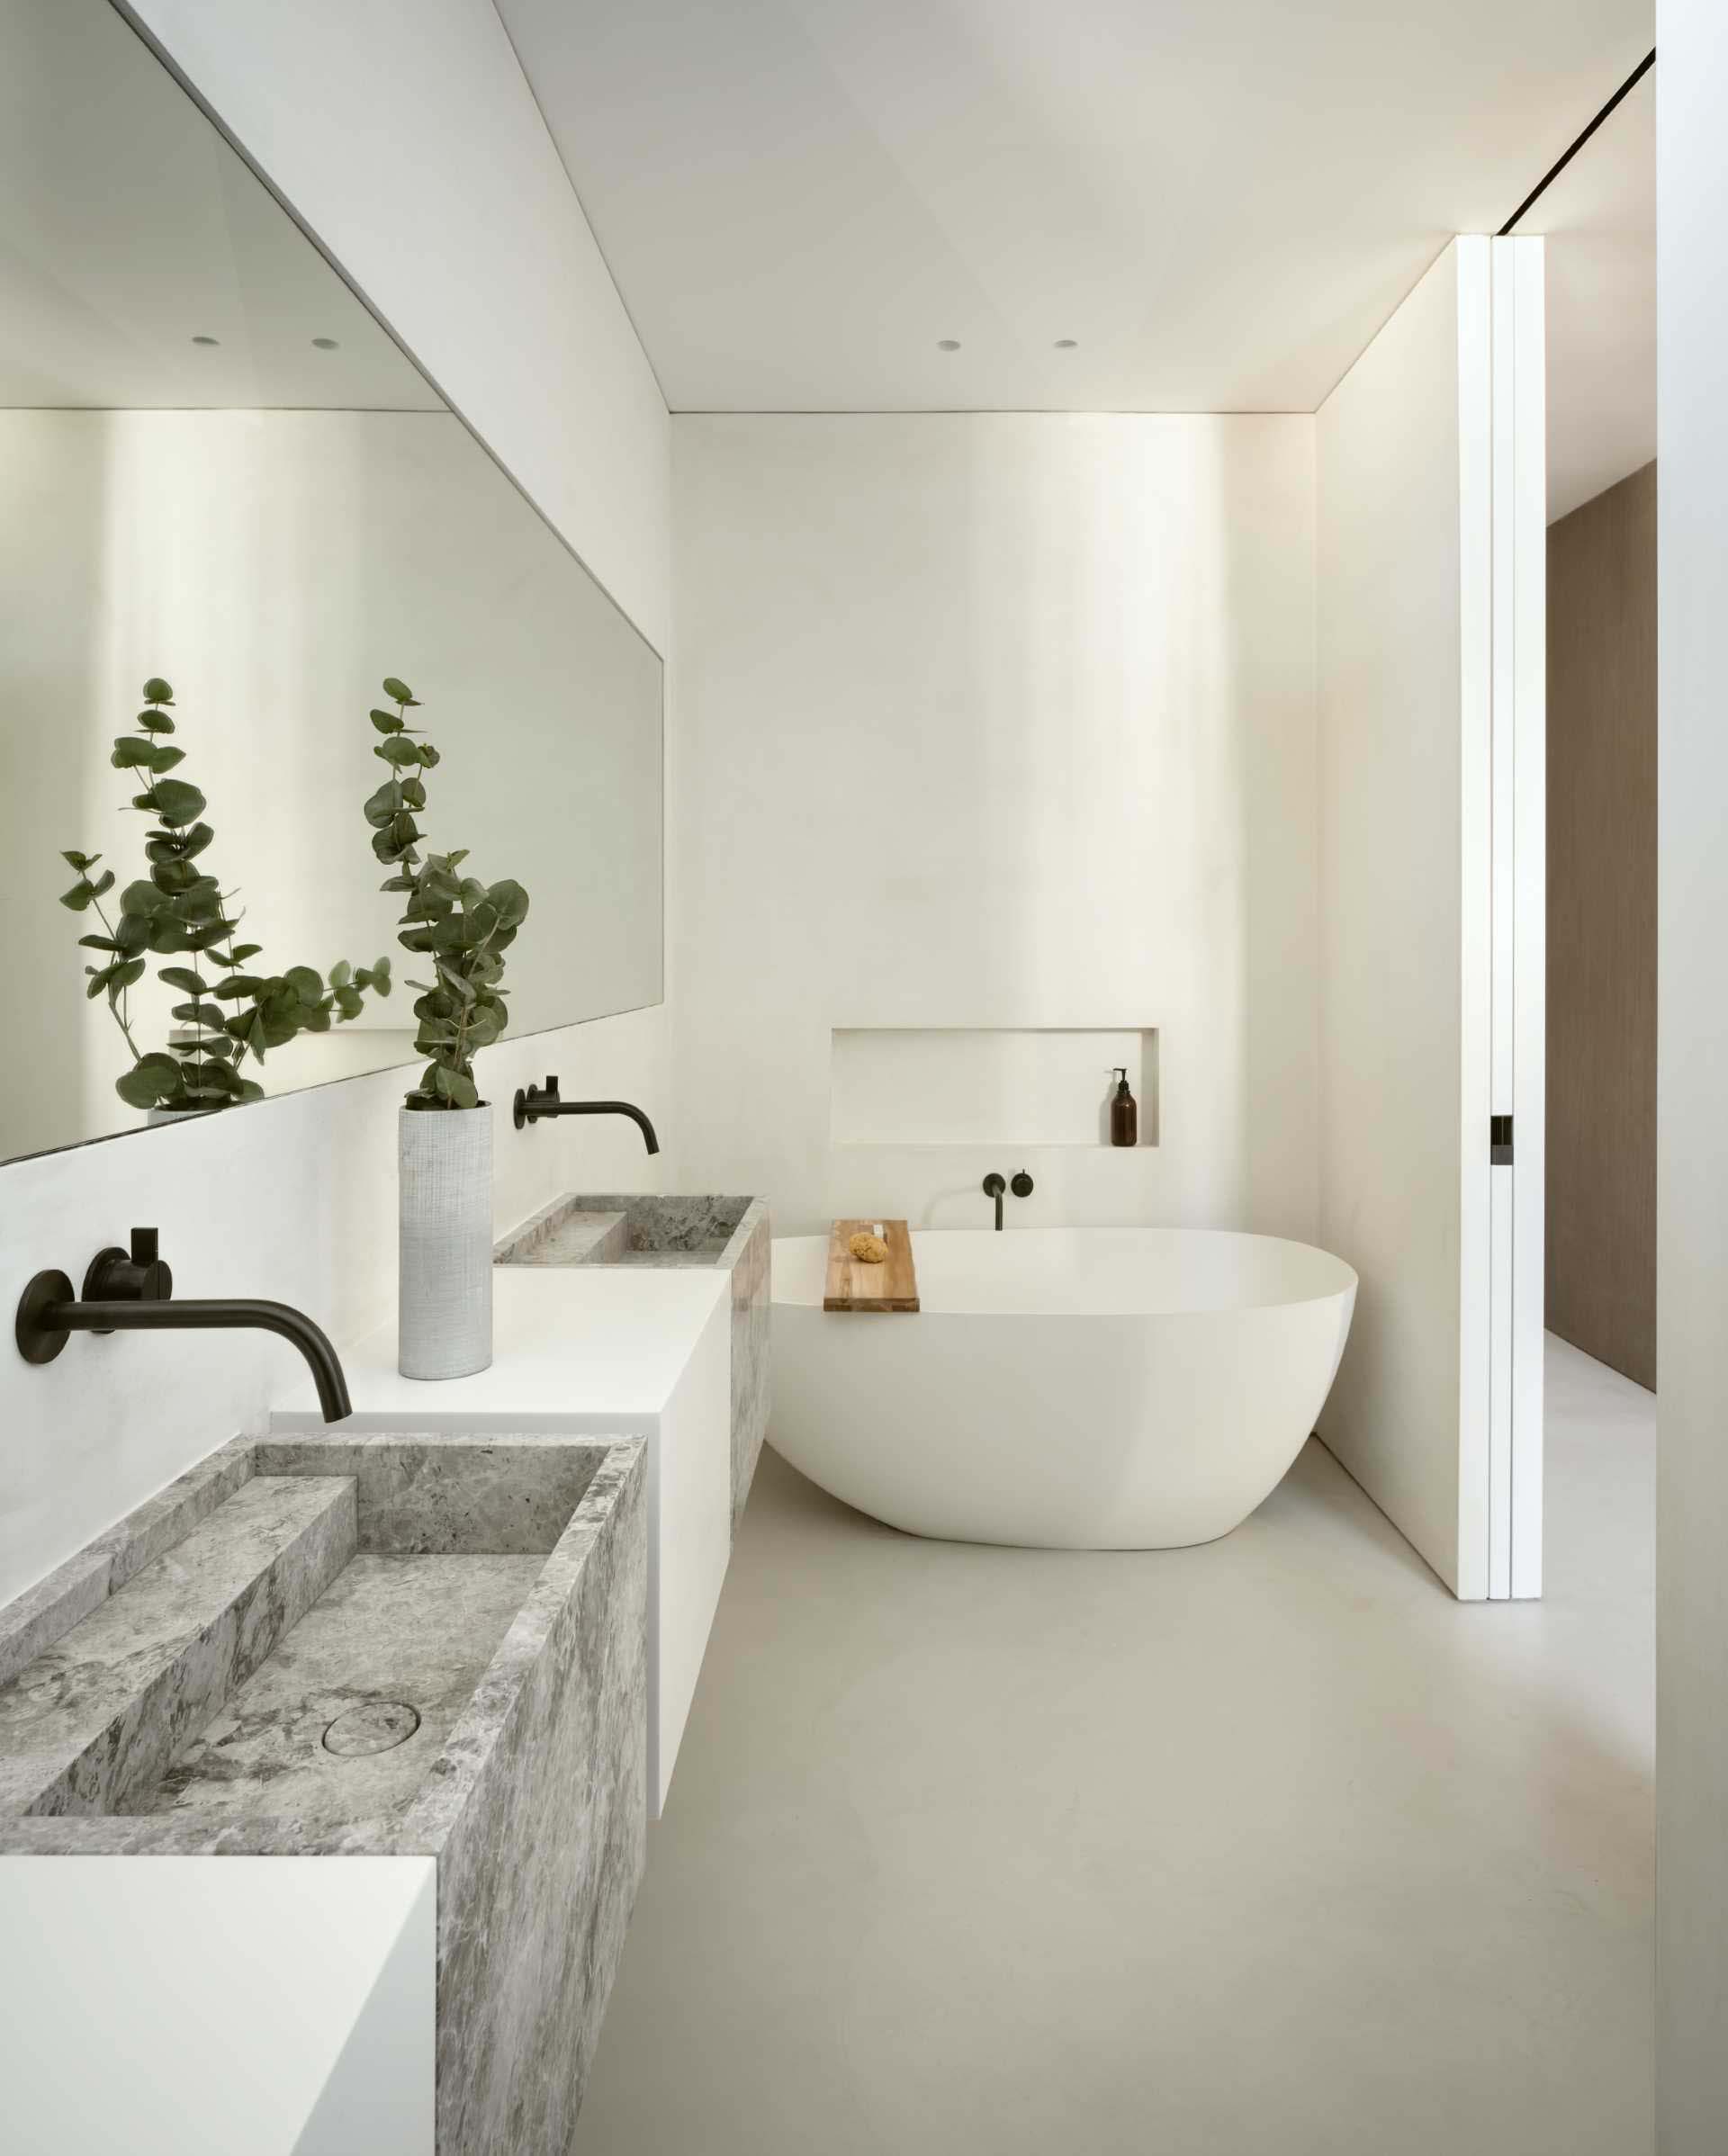 A shelving niche has been built into the wall adjacent to the freestanding bathtub in this modern bathroom, allowing for items like soap to be kept within reach.